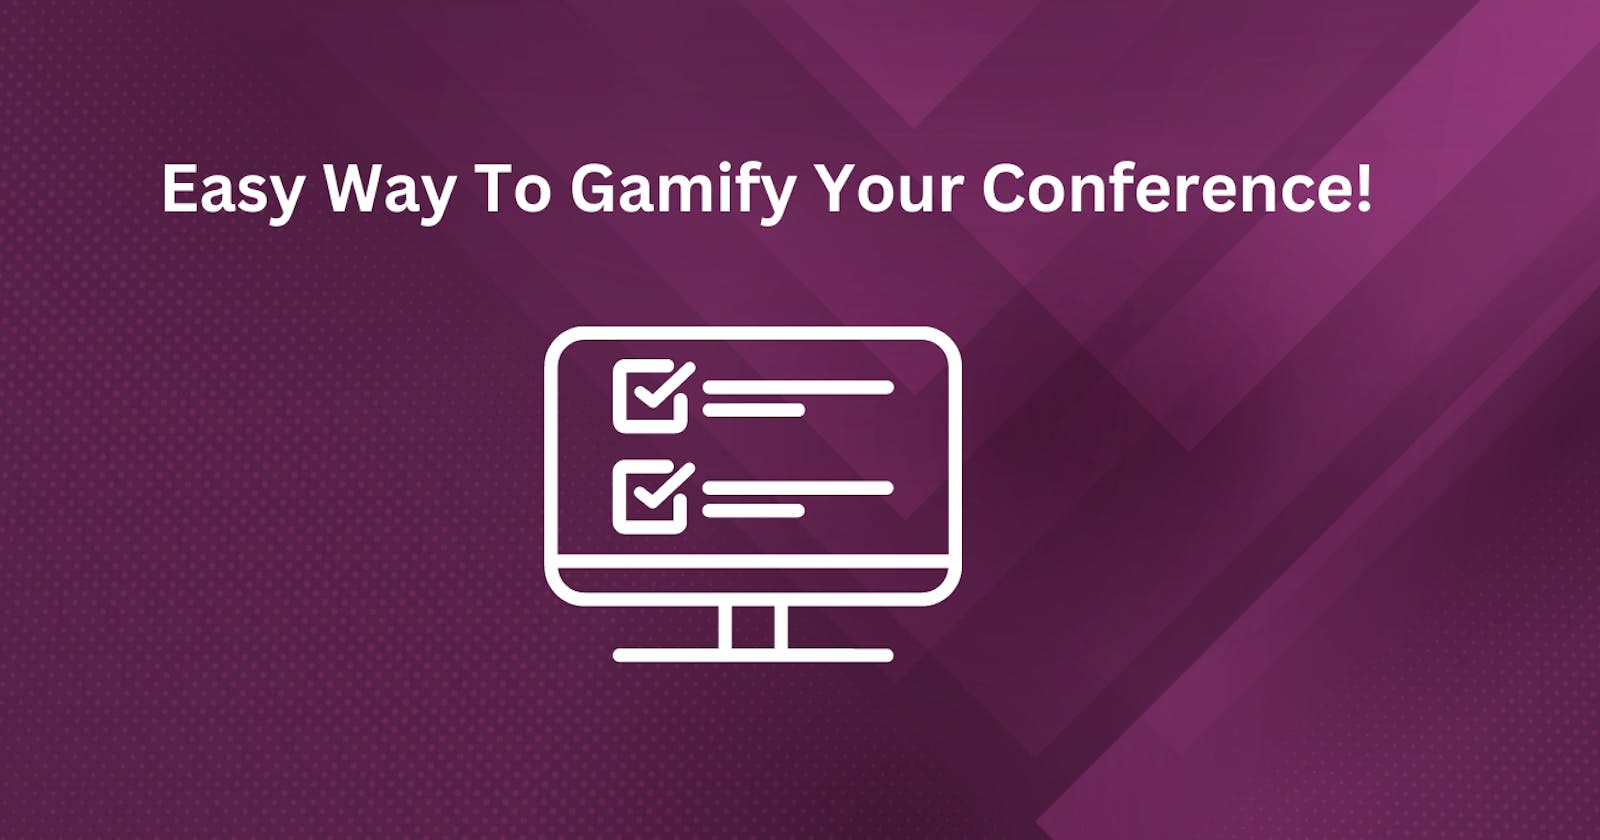 Easy way to gamify your conference!